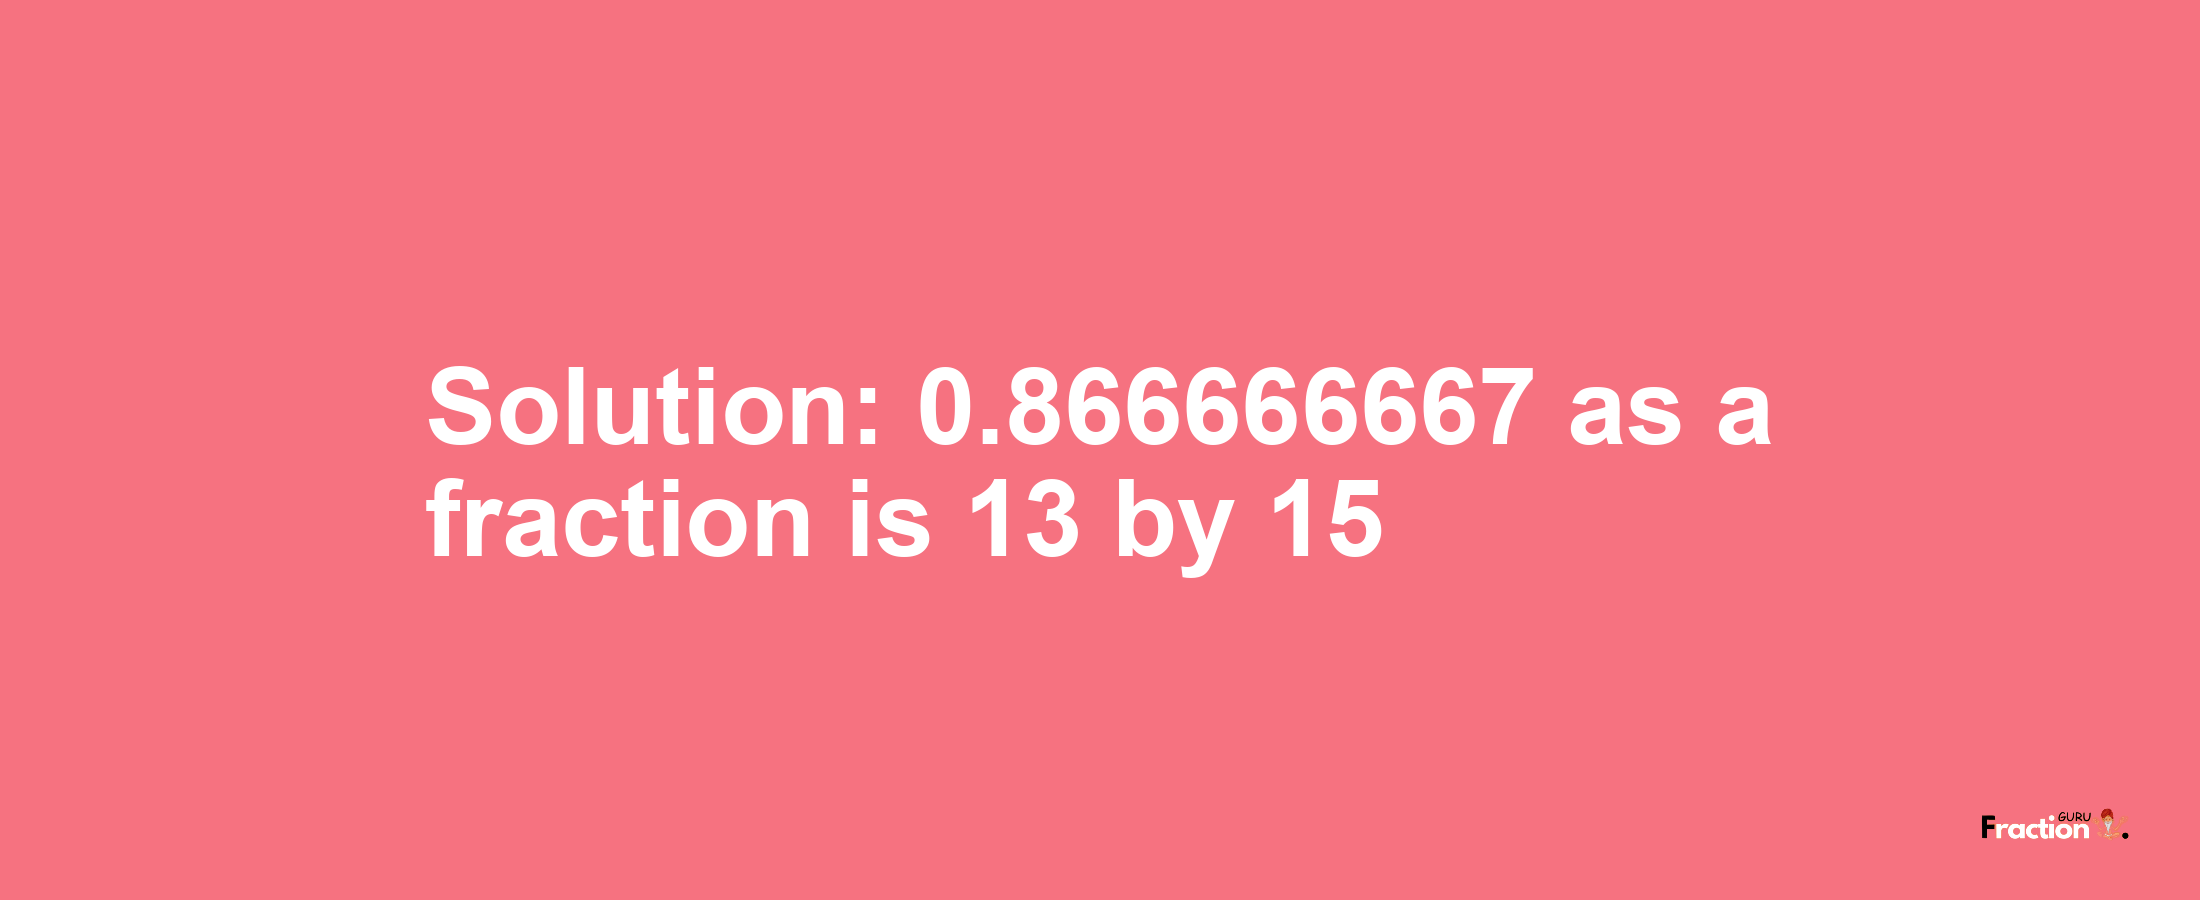 Solution:0.866666667 as a fraction is 13/15